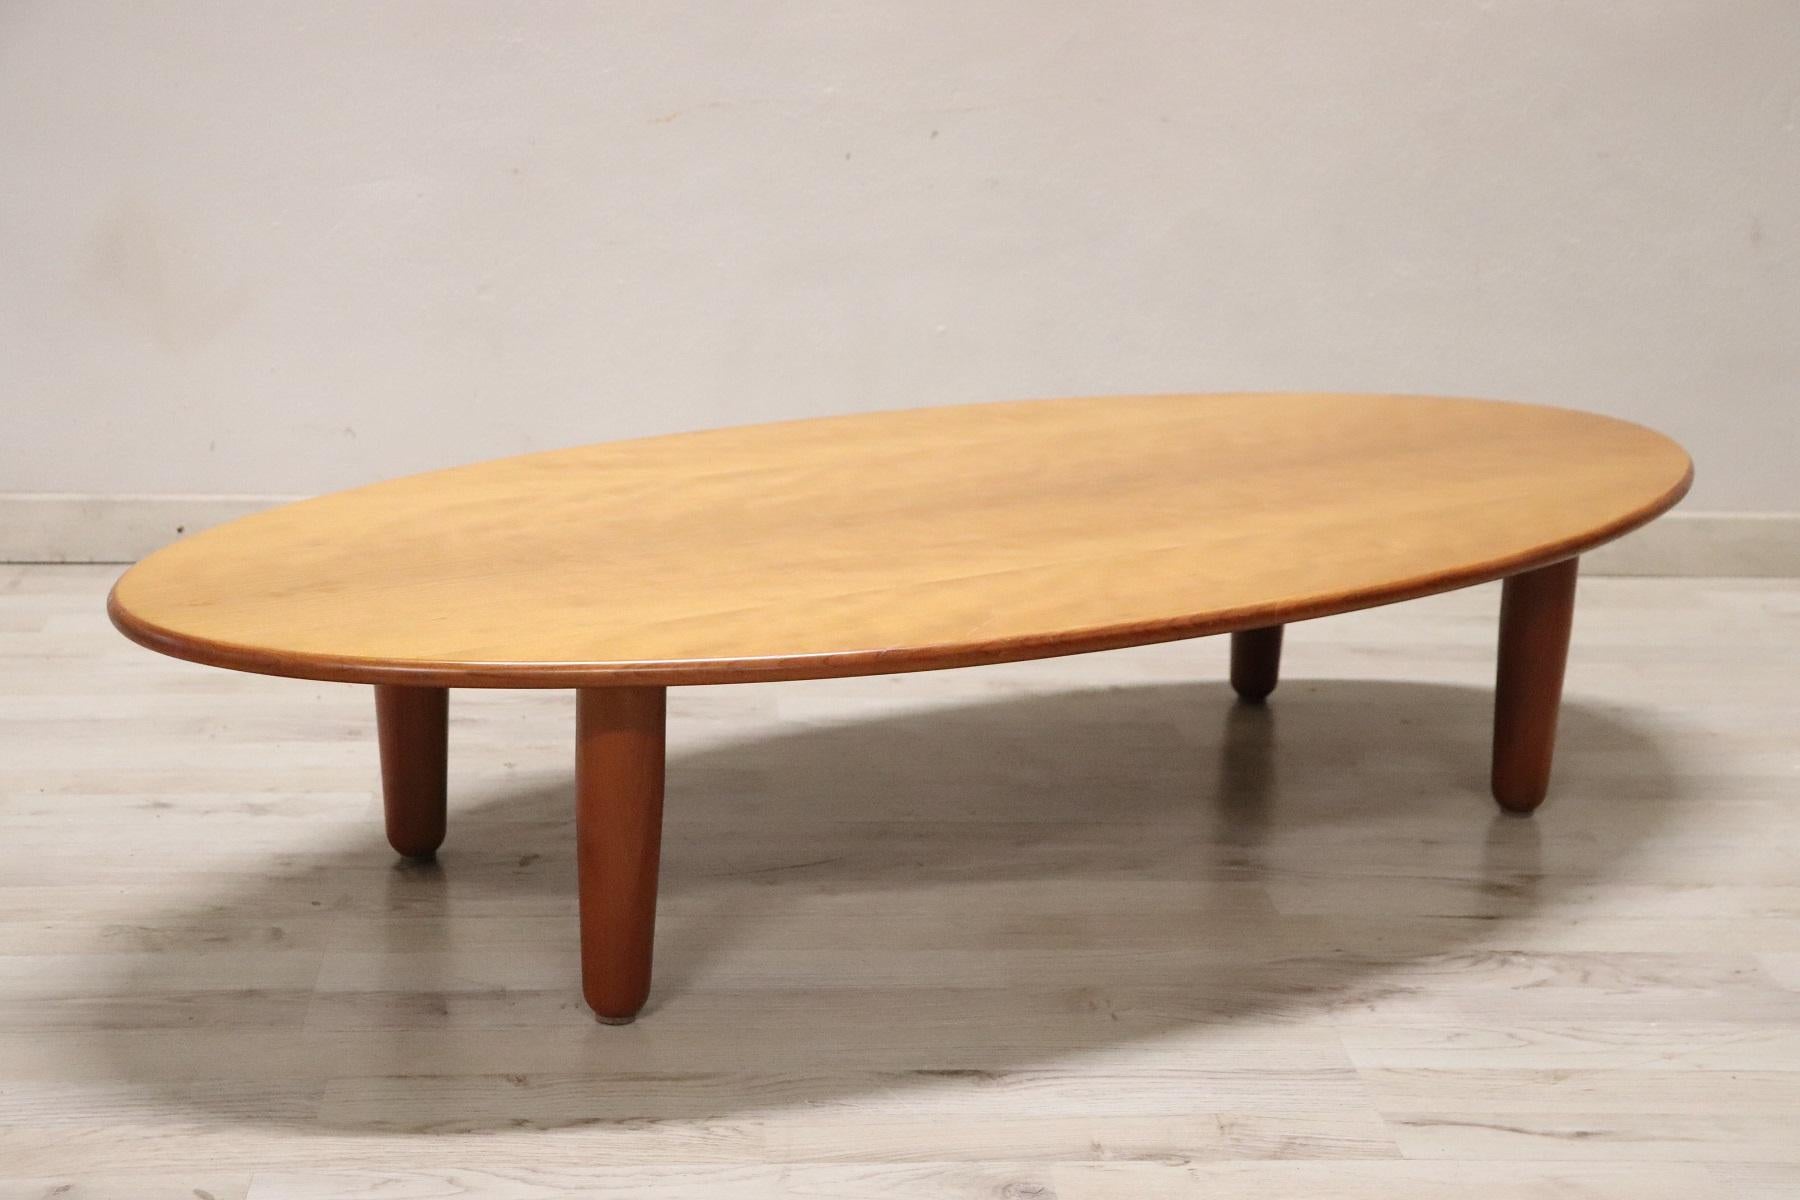 Rare and fine quality Italian design coffee table or sofa table by Cassina 1980s. The table is in precious ash wood. In perfect vintage conditions.